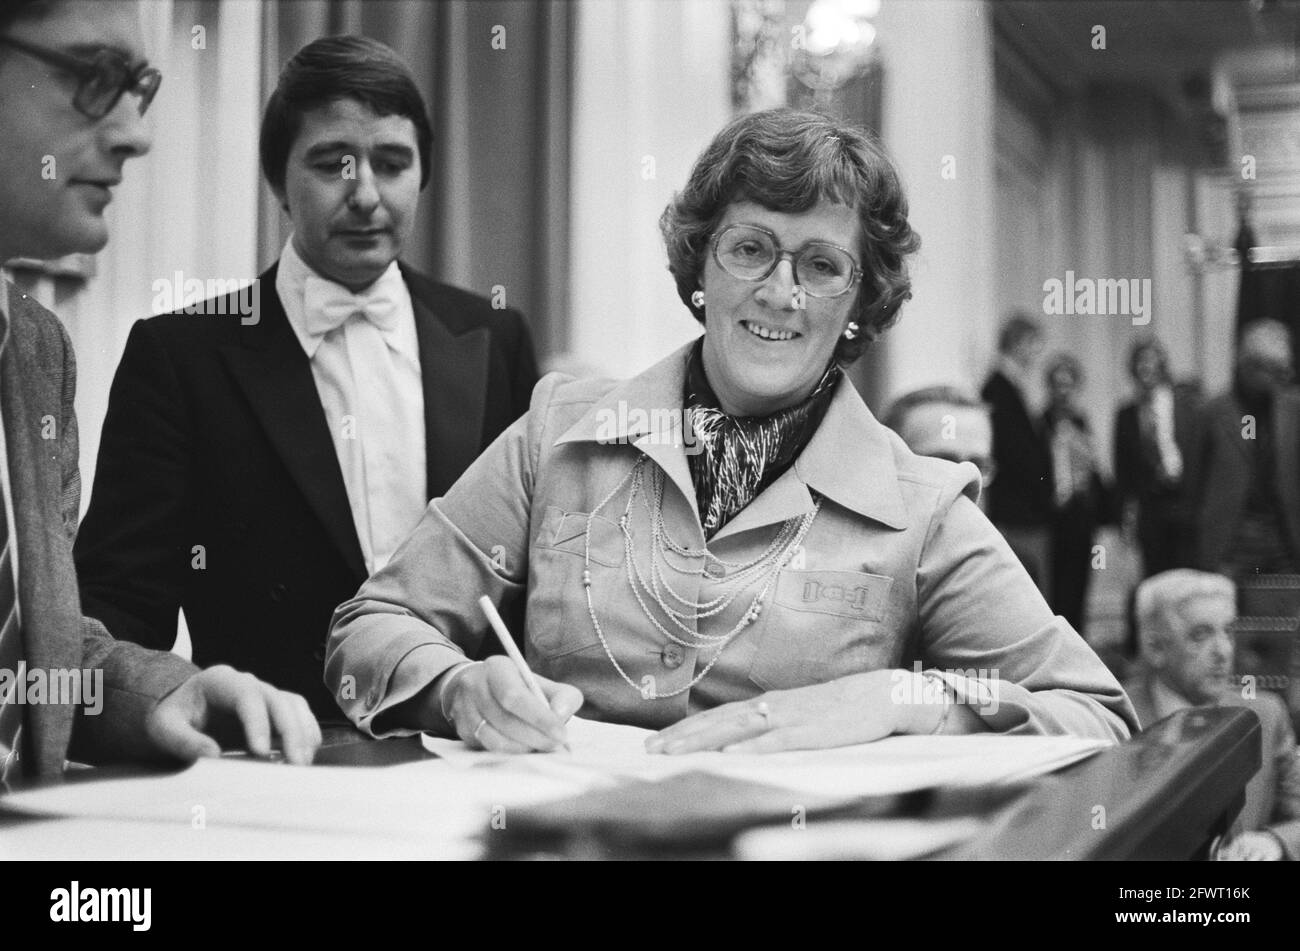 New member of the Lower House for PvdA Mrs. Annie Krouwel Vlam, January 18, 1977, assumptions of office, parliamentarians, politics, The Netherlands, 20th century press agency photo, news to remember, documentary, historic photography 1945-1990, visual stories, human history of the Twentieth Century, capturing moments in time Stock Photo